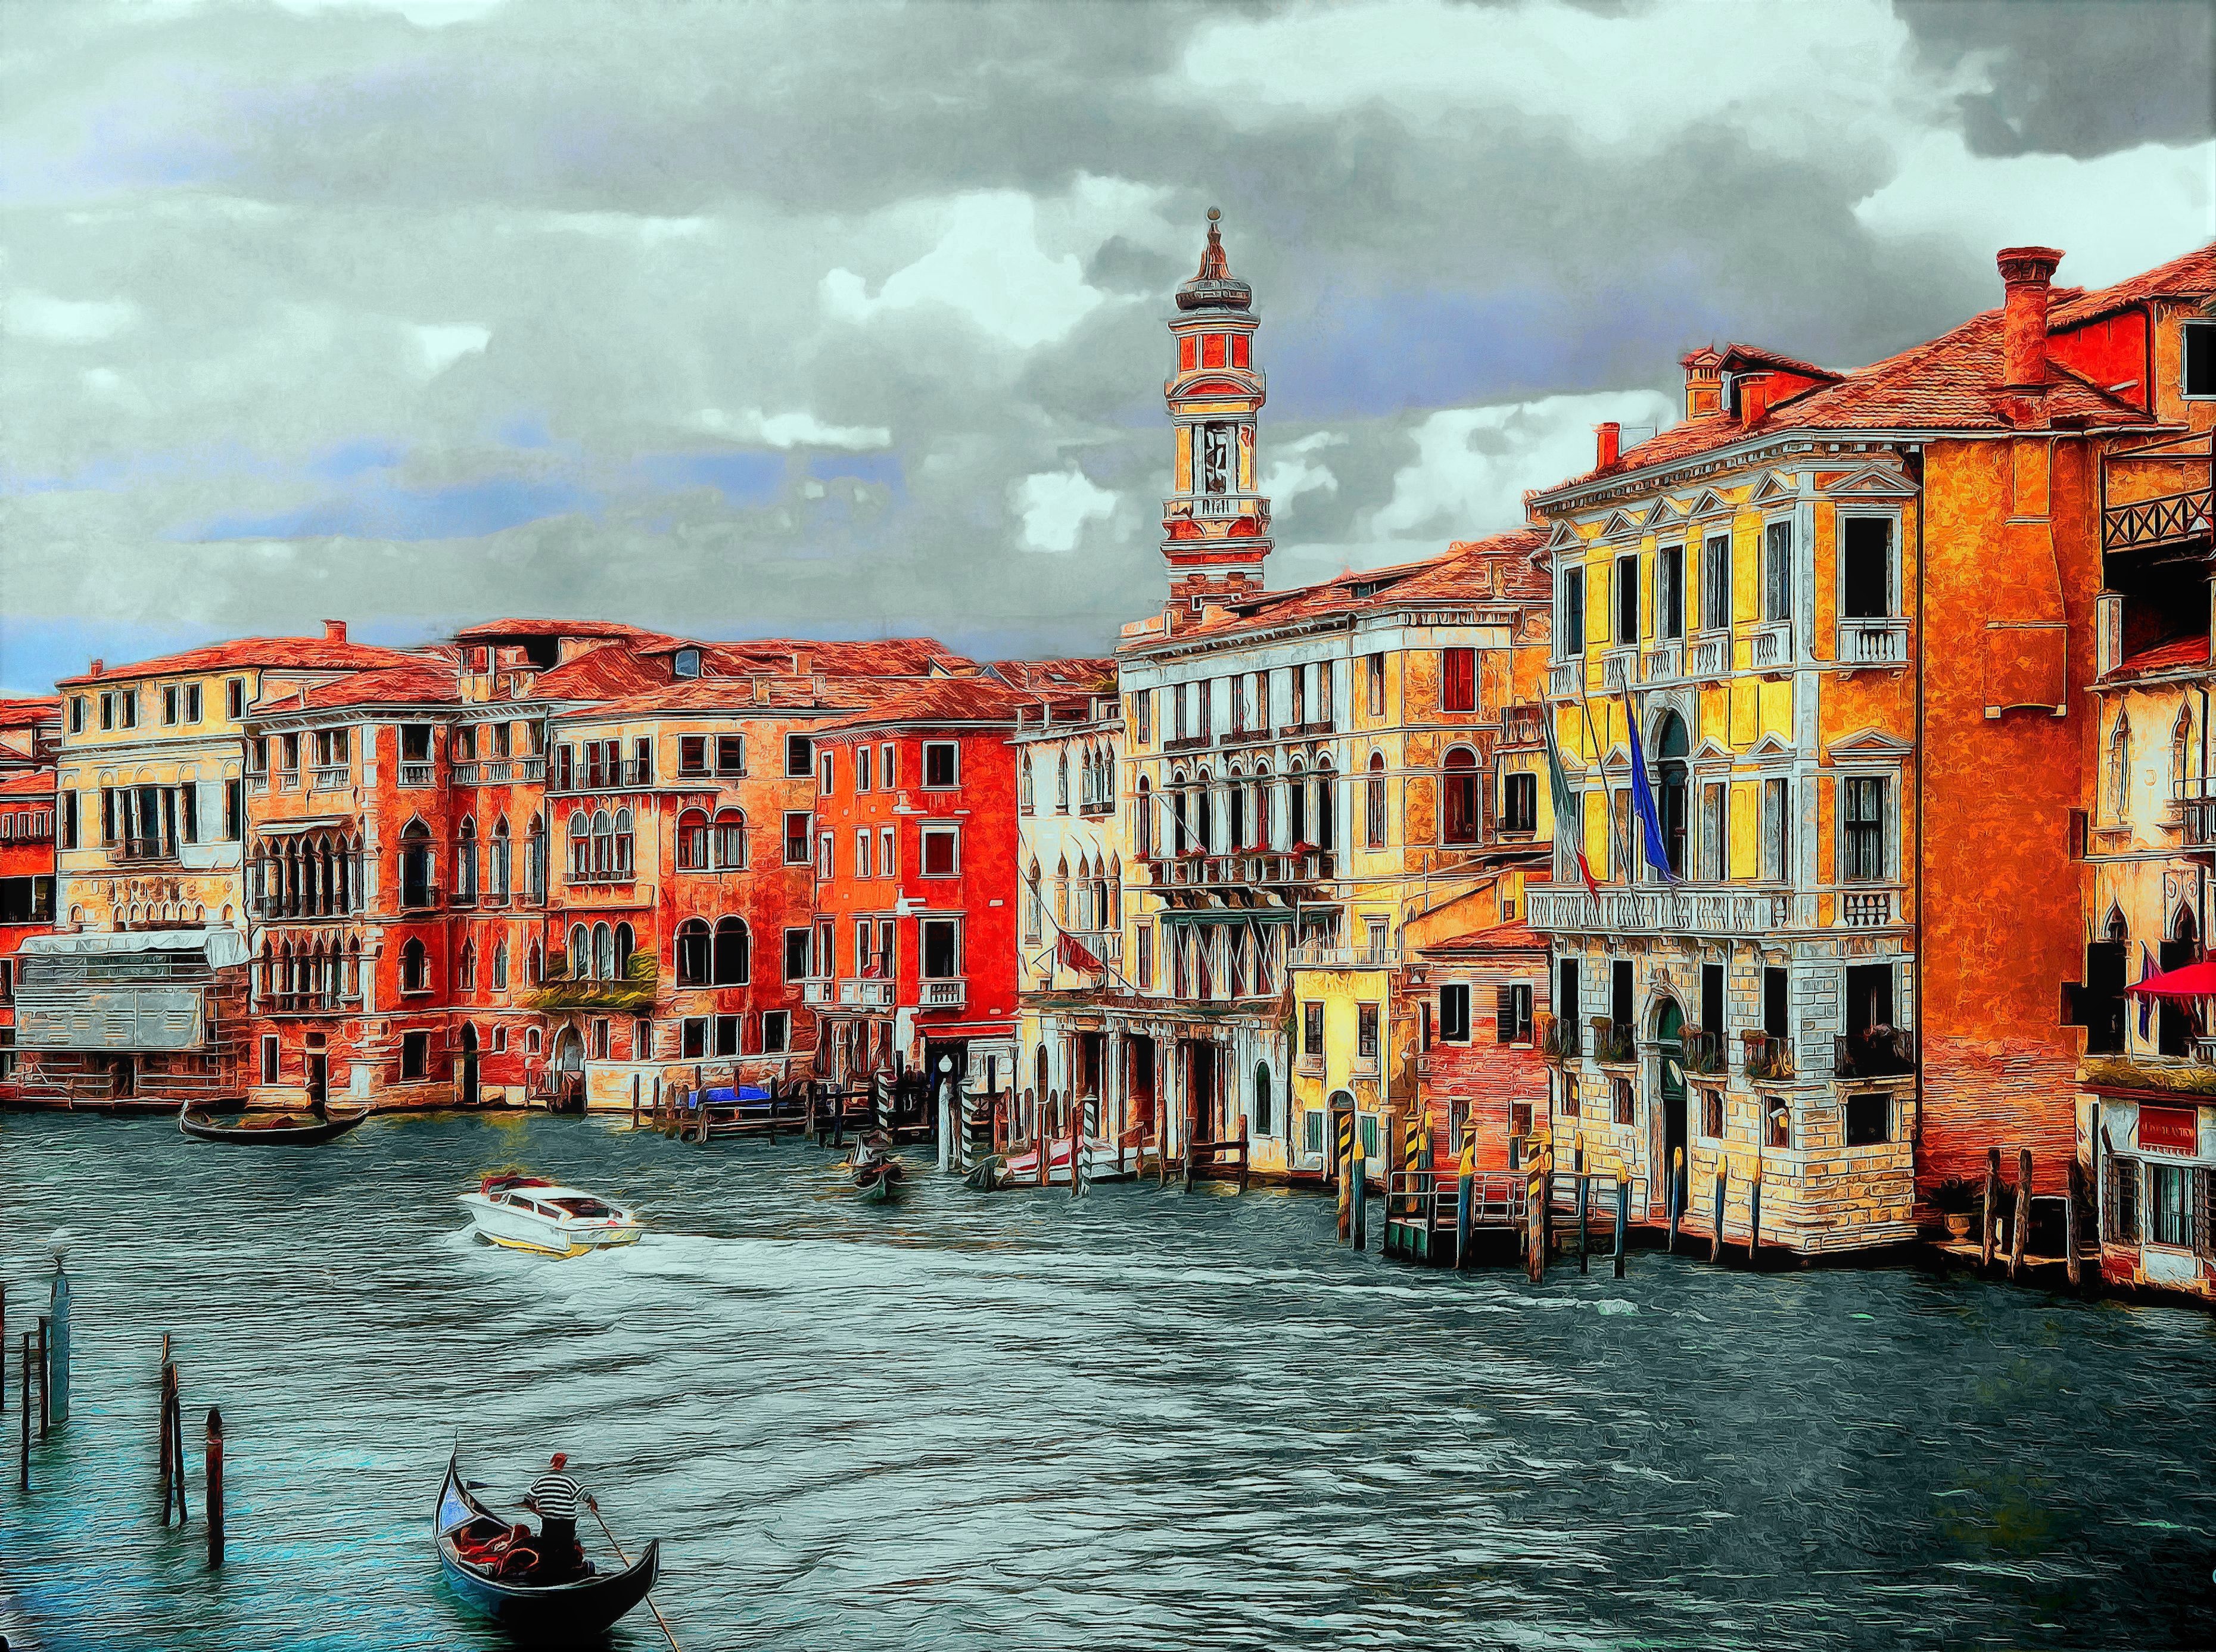 man made, venice, building, colorful, gondola, grand canal, italy, cities 5K